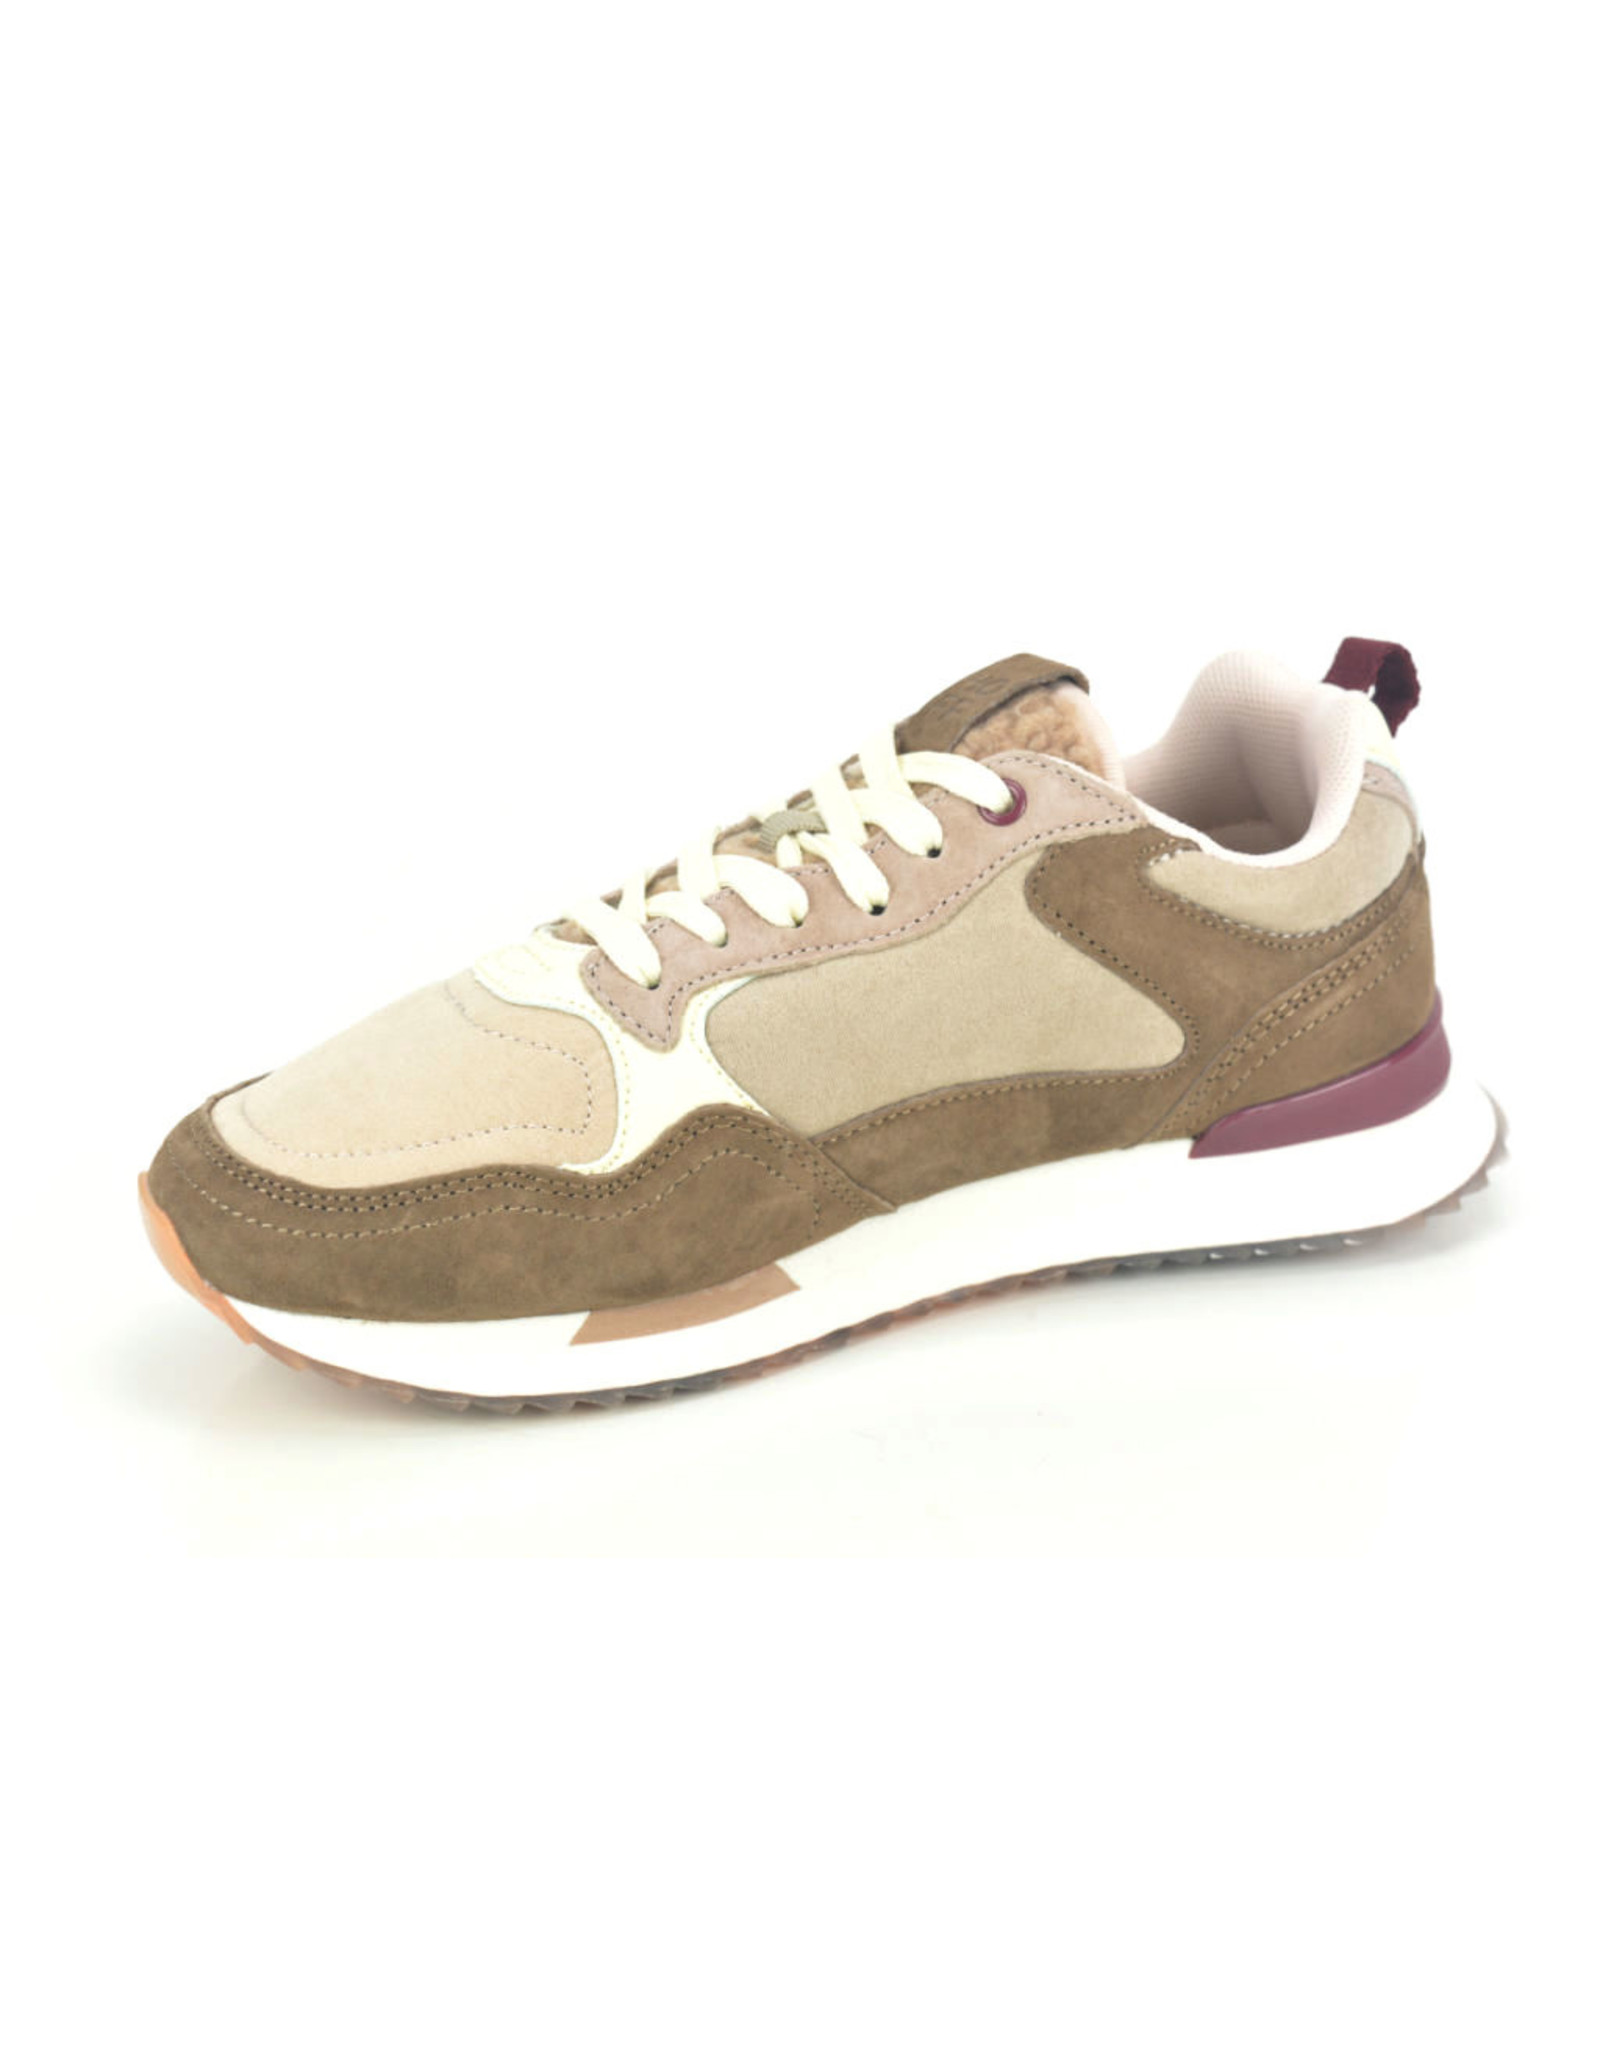 Hoff 9939 taupe